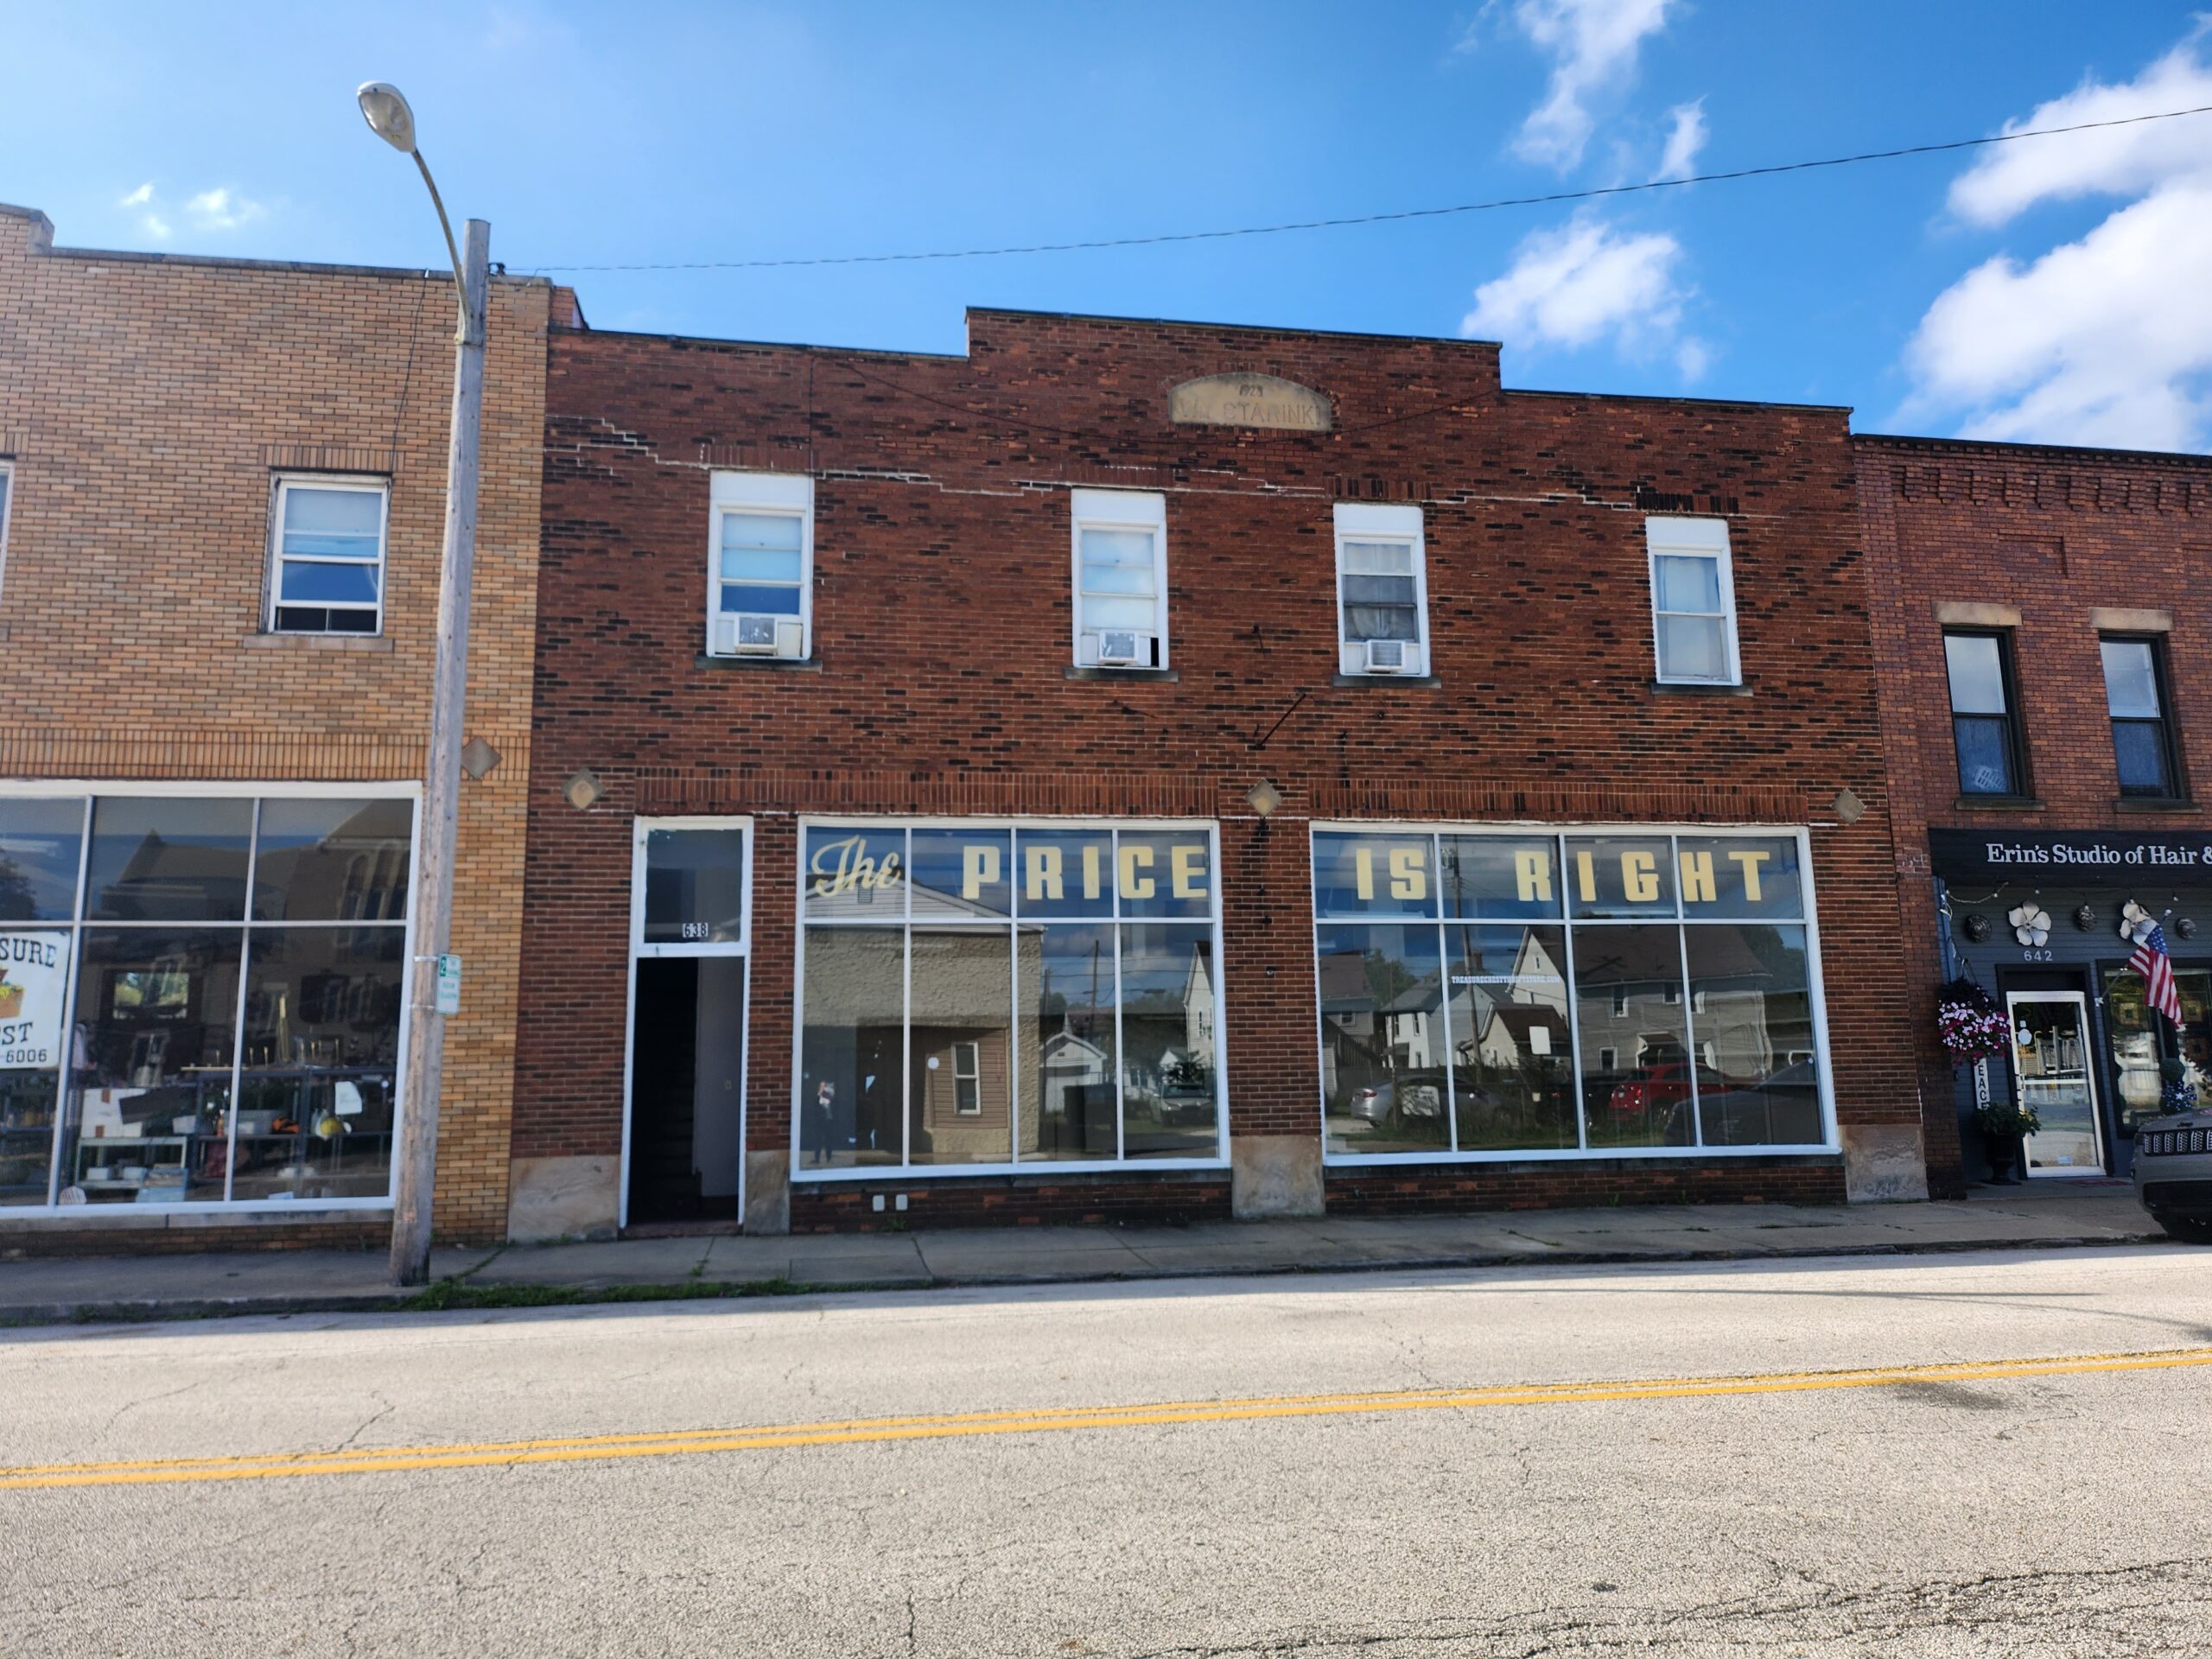 638 W. Tuscarawas Approx. 5,000 sq ft. For Lease $ 2750 a month